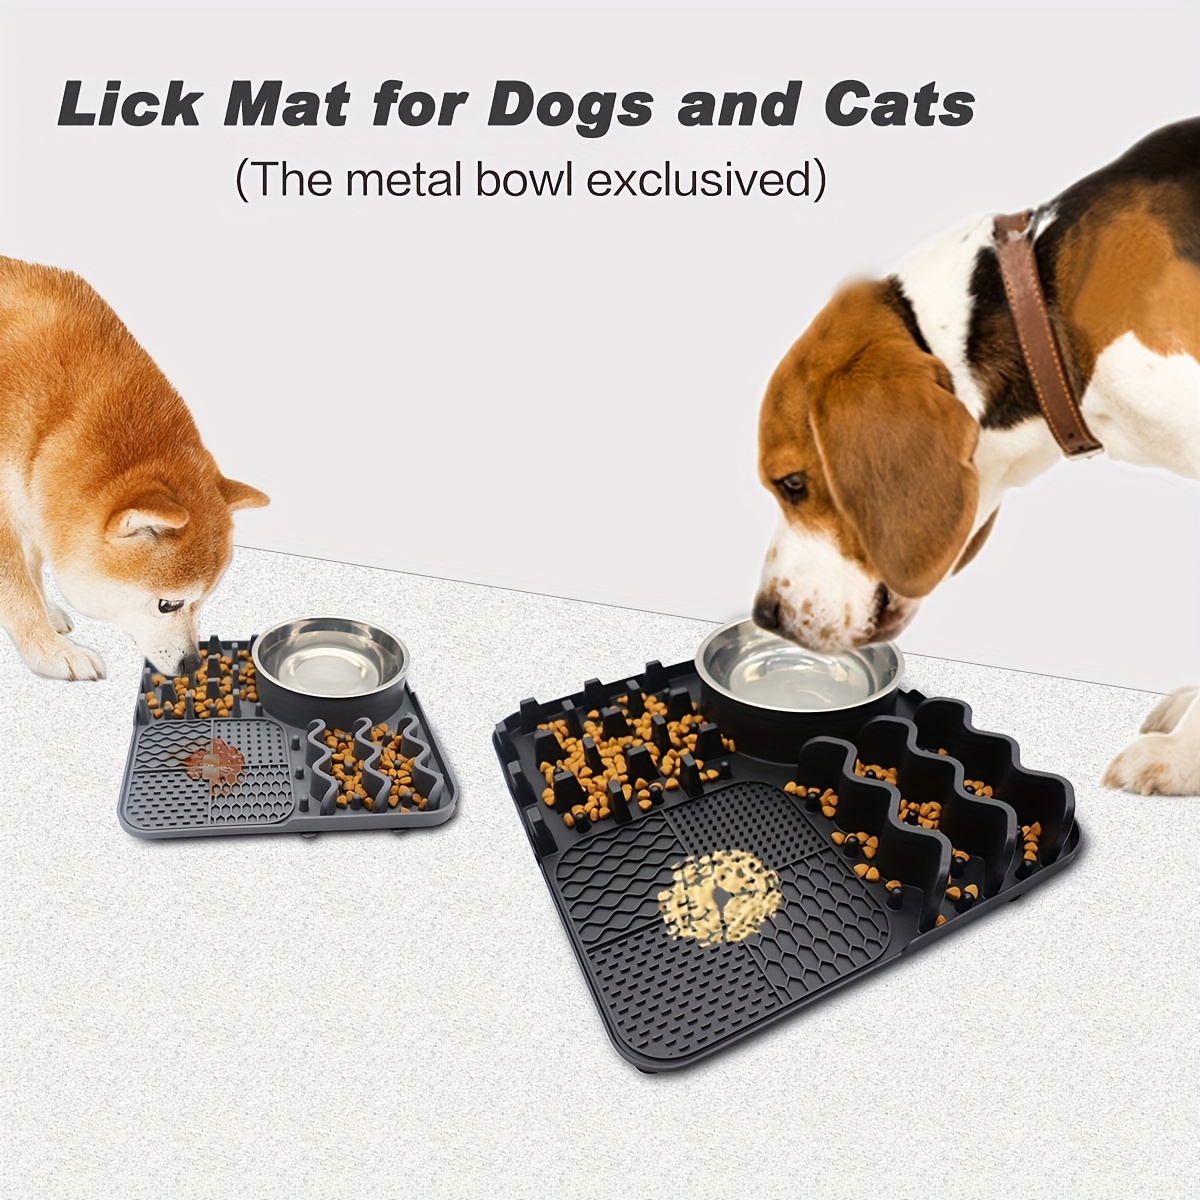 Licking Mat For Dogs And Cats, Premium Lick Mats With Suction Cups